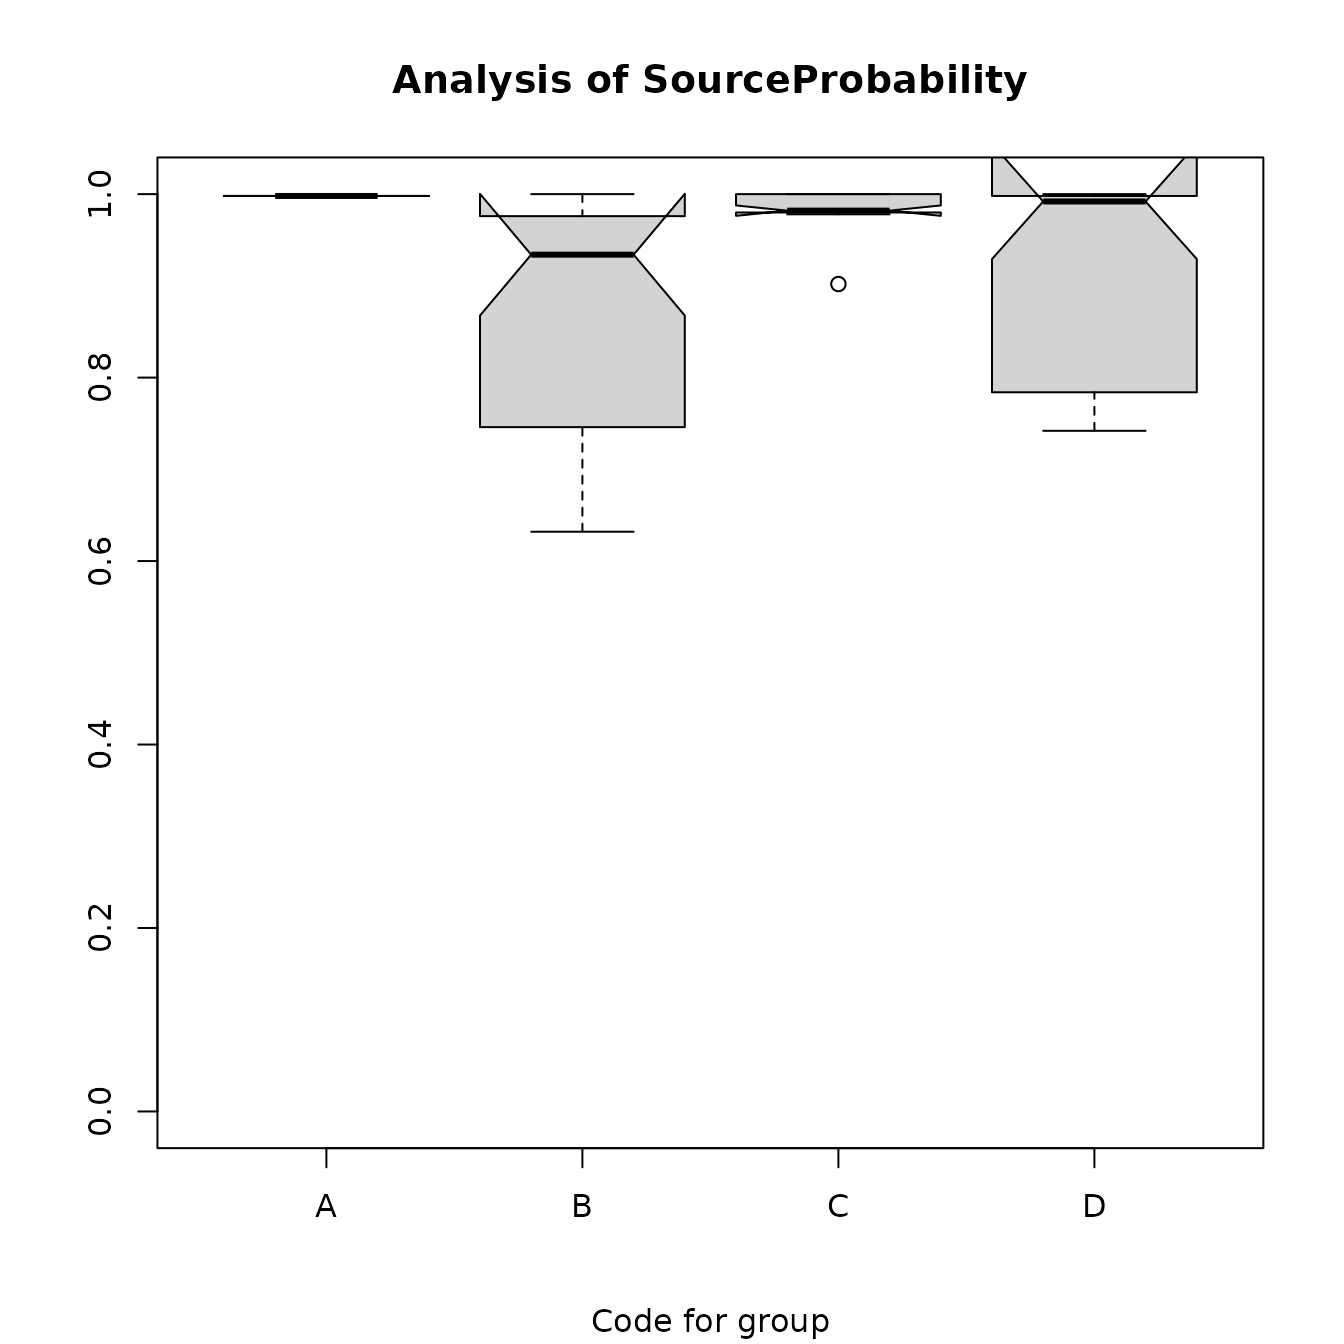 Figure 7.3a: Box plots of the estimated probabilities for the predicted sources for the obsidian artifacts.